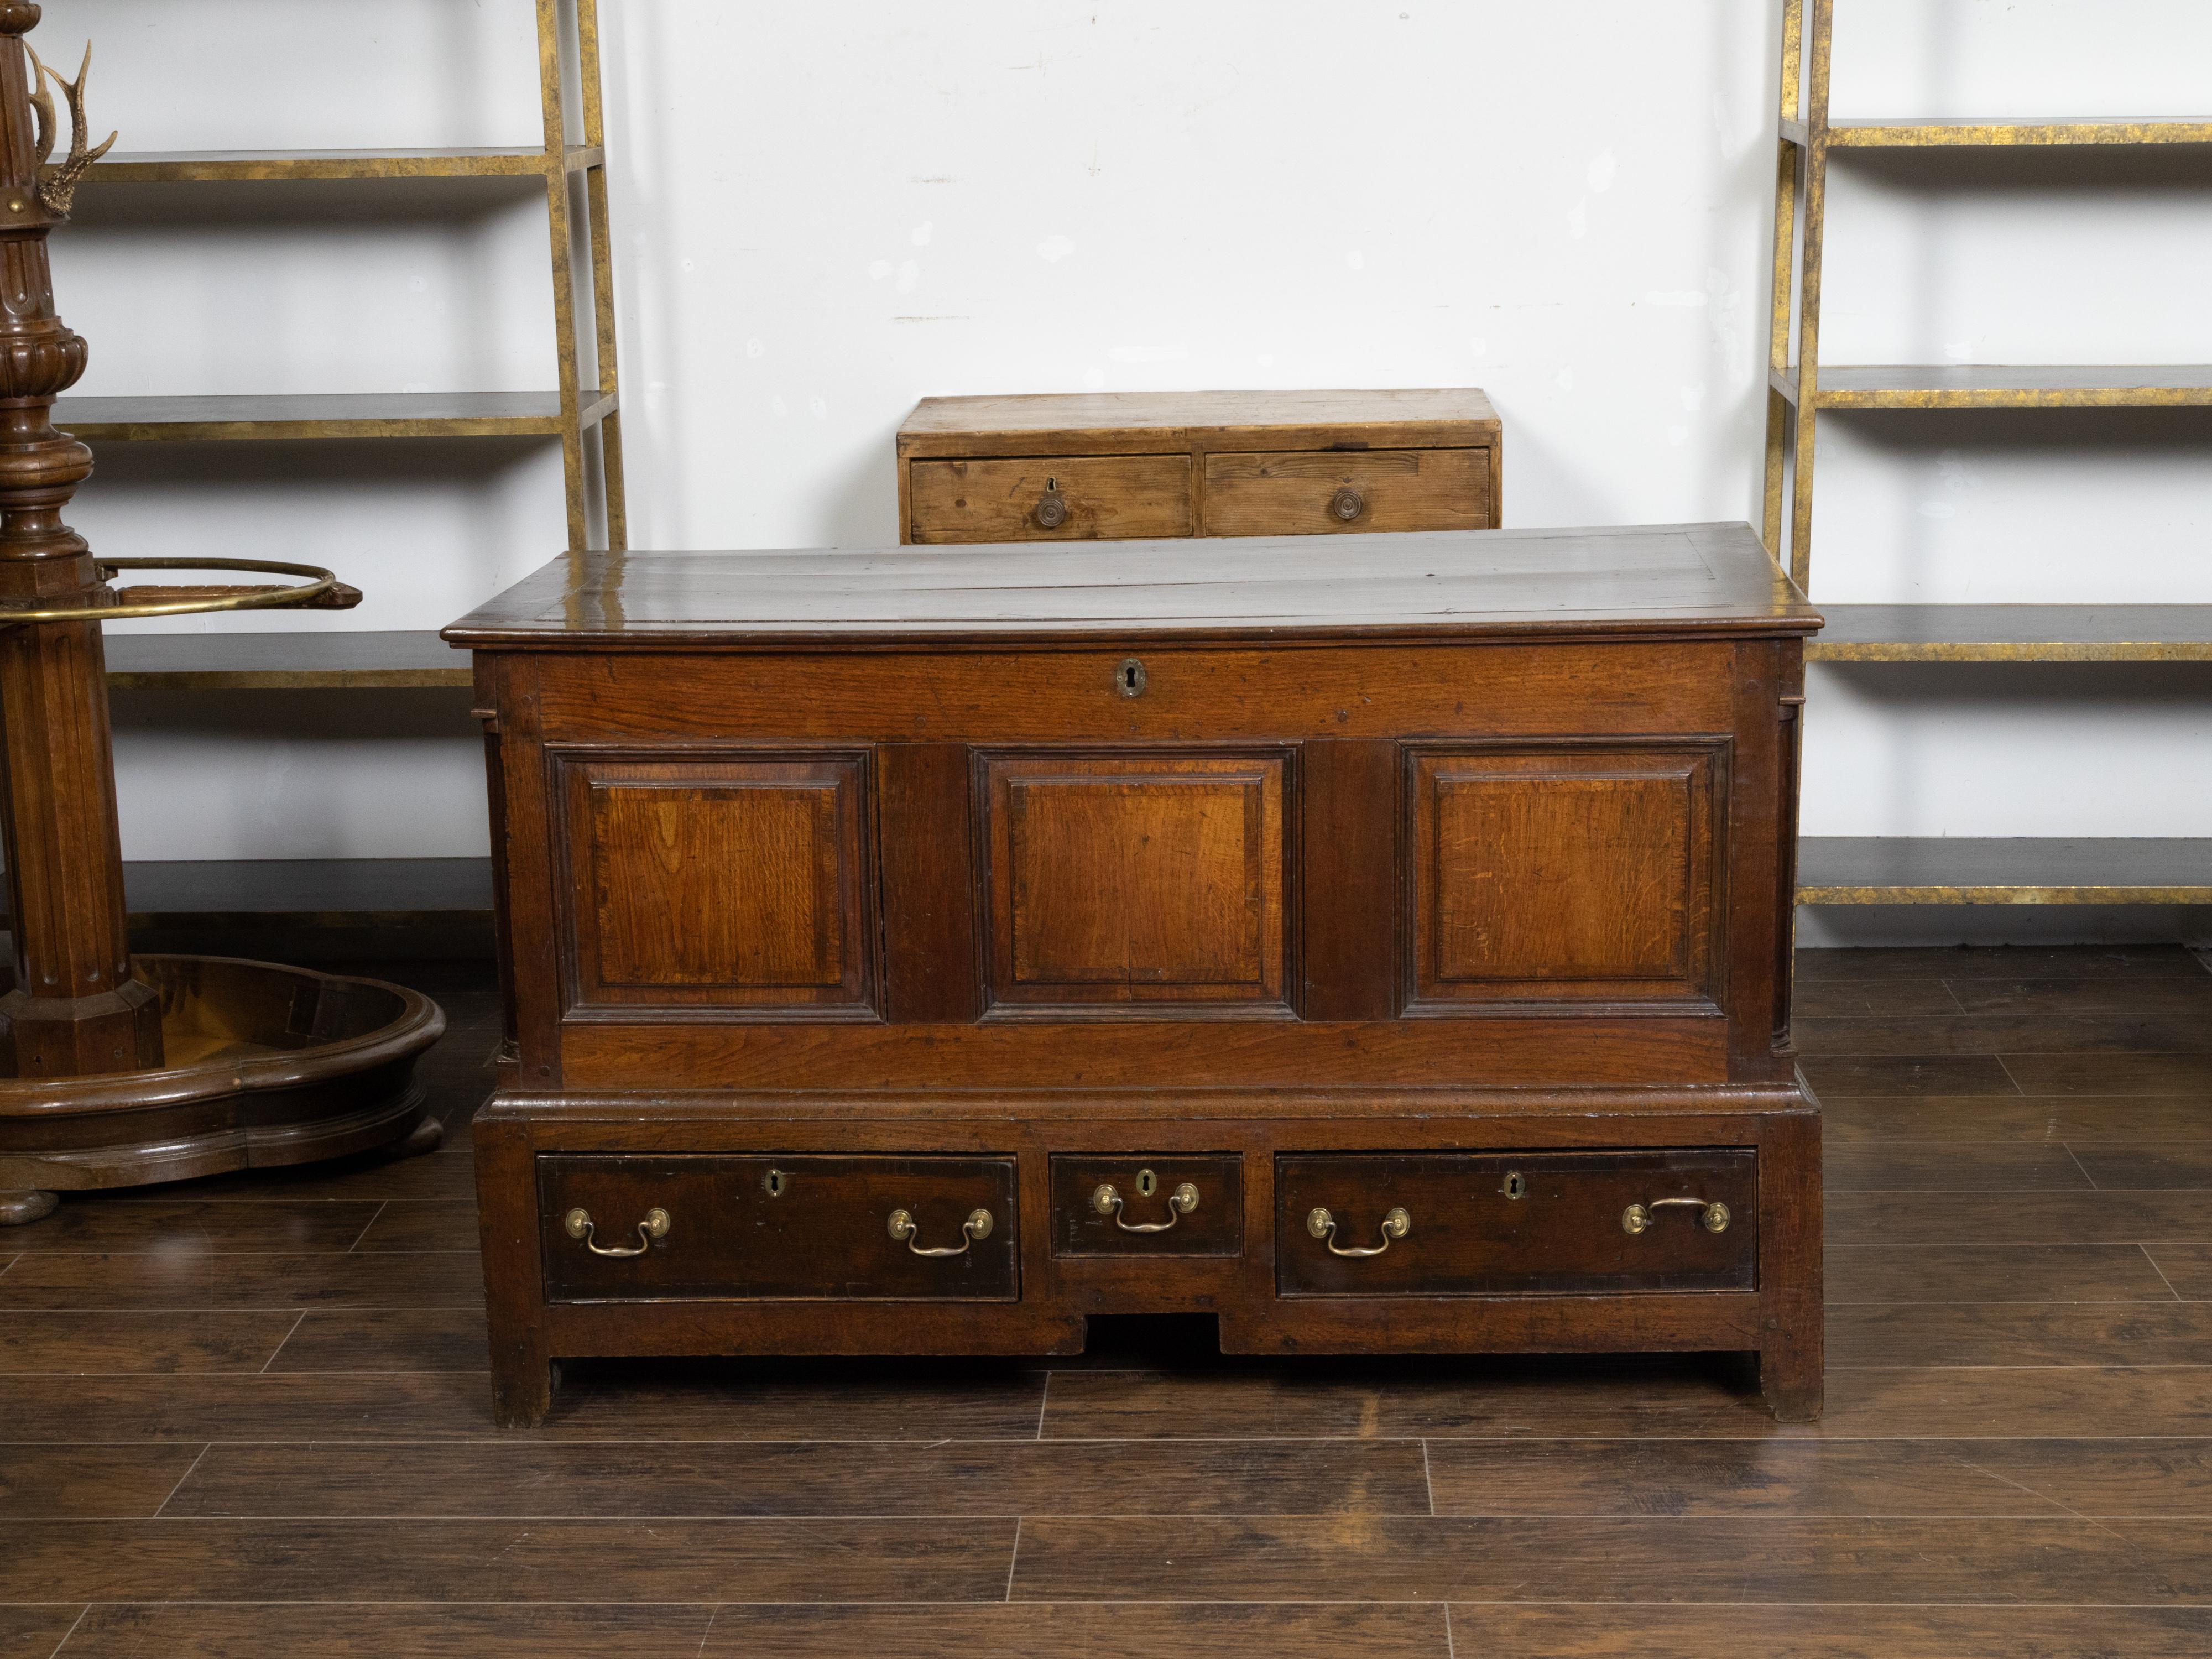 An English Georgian period oak mule chest from the early 19th century, with lift top, three drawers and brass hardware. Created in England during the Georgian period in the early years of the 19th century, this oak chest called a mule chest features